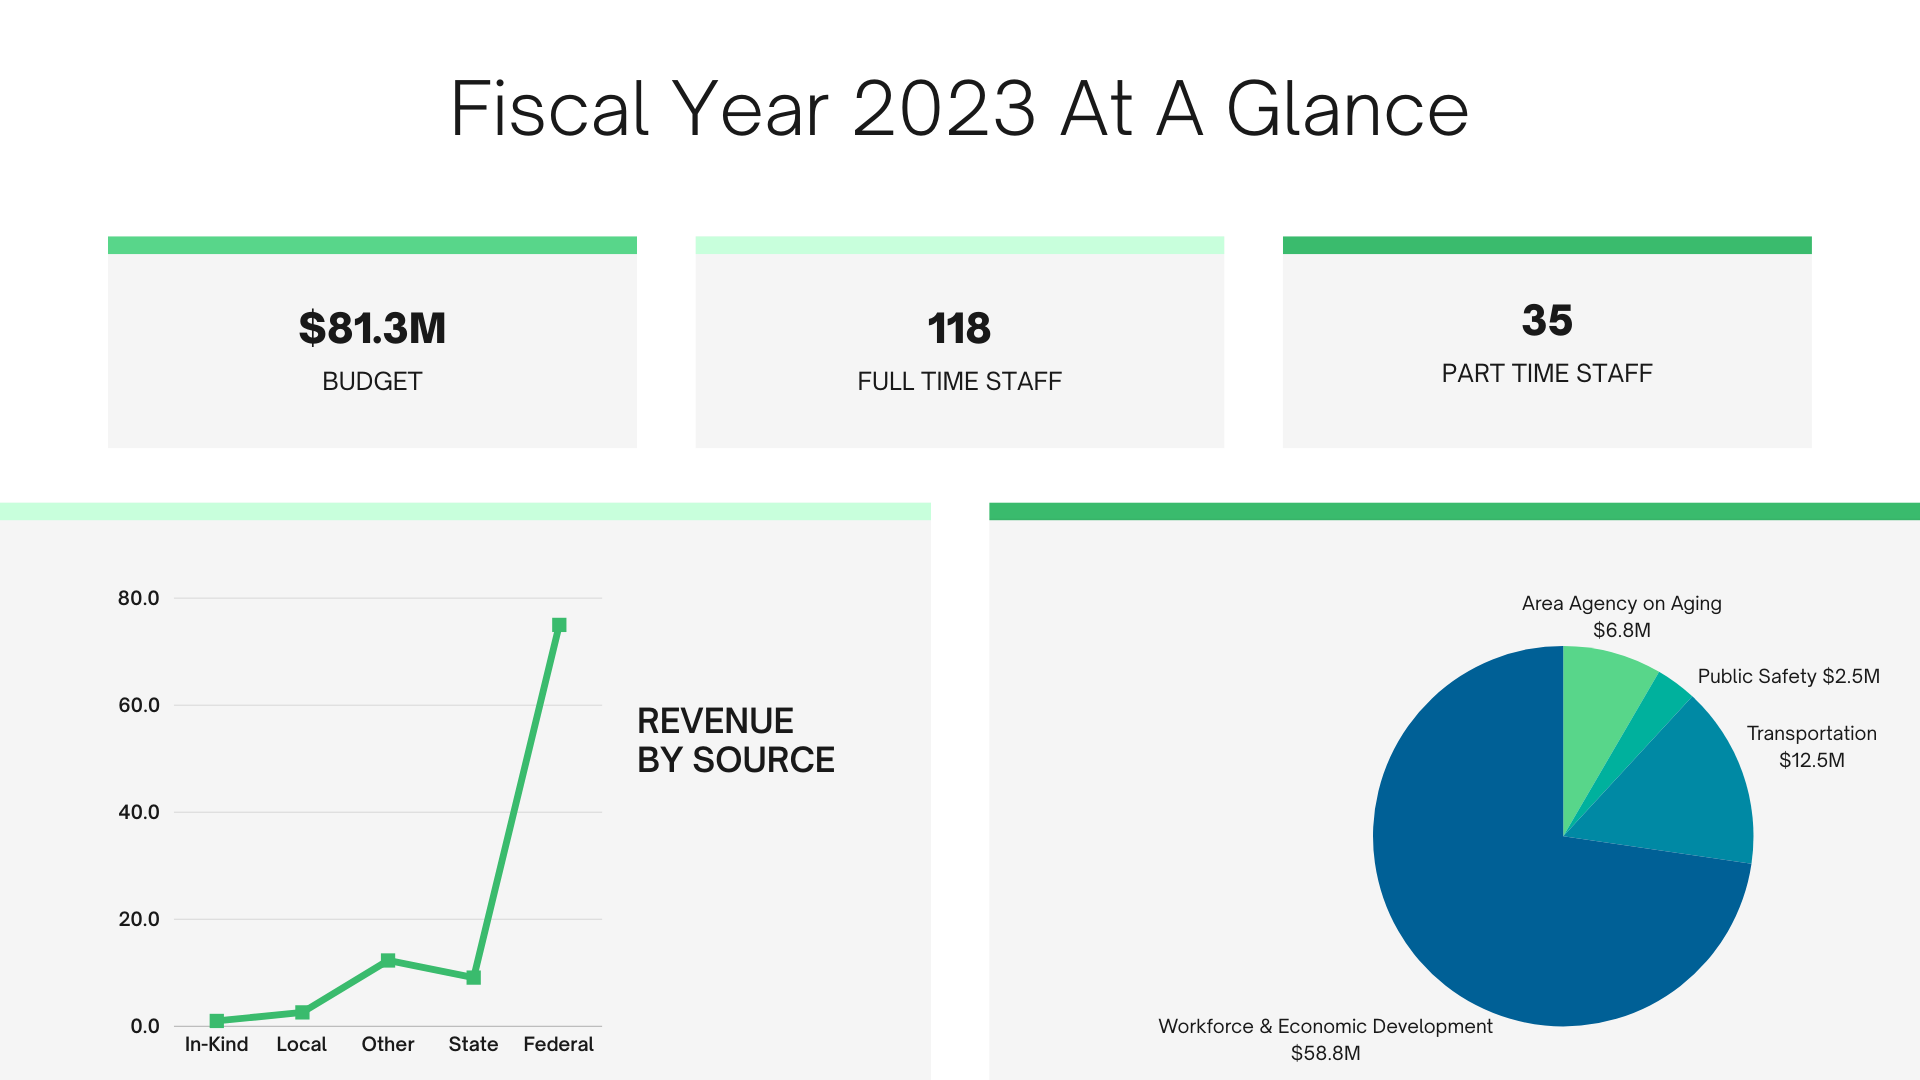 A dashboard showing the fiscal year 2023 at a glance